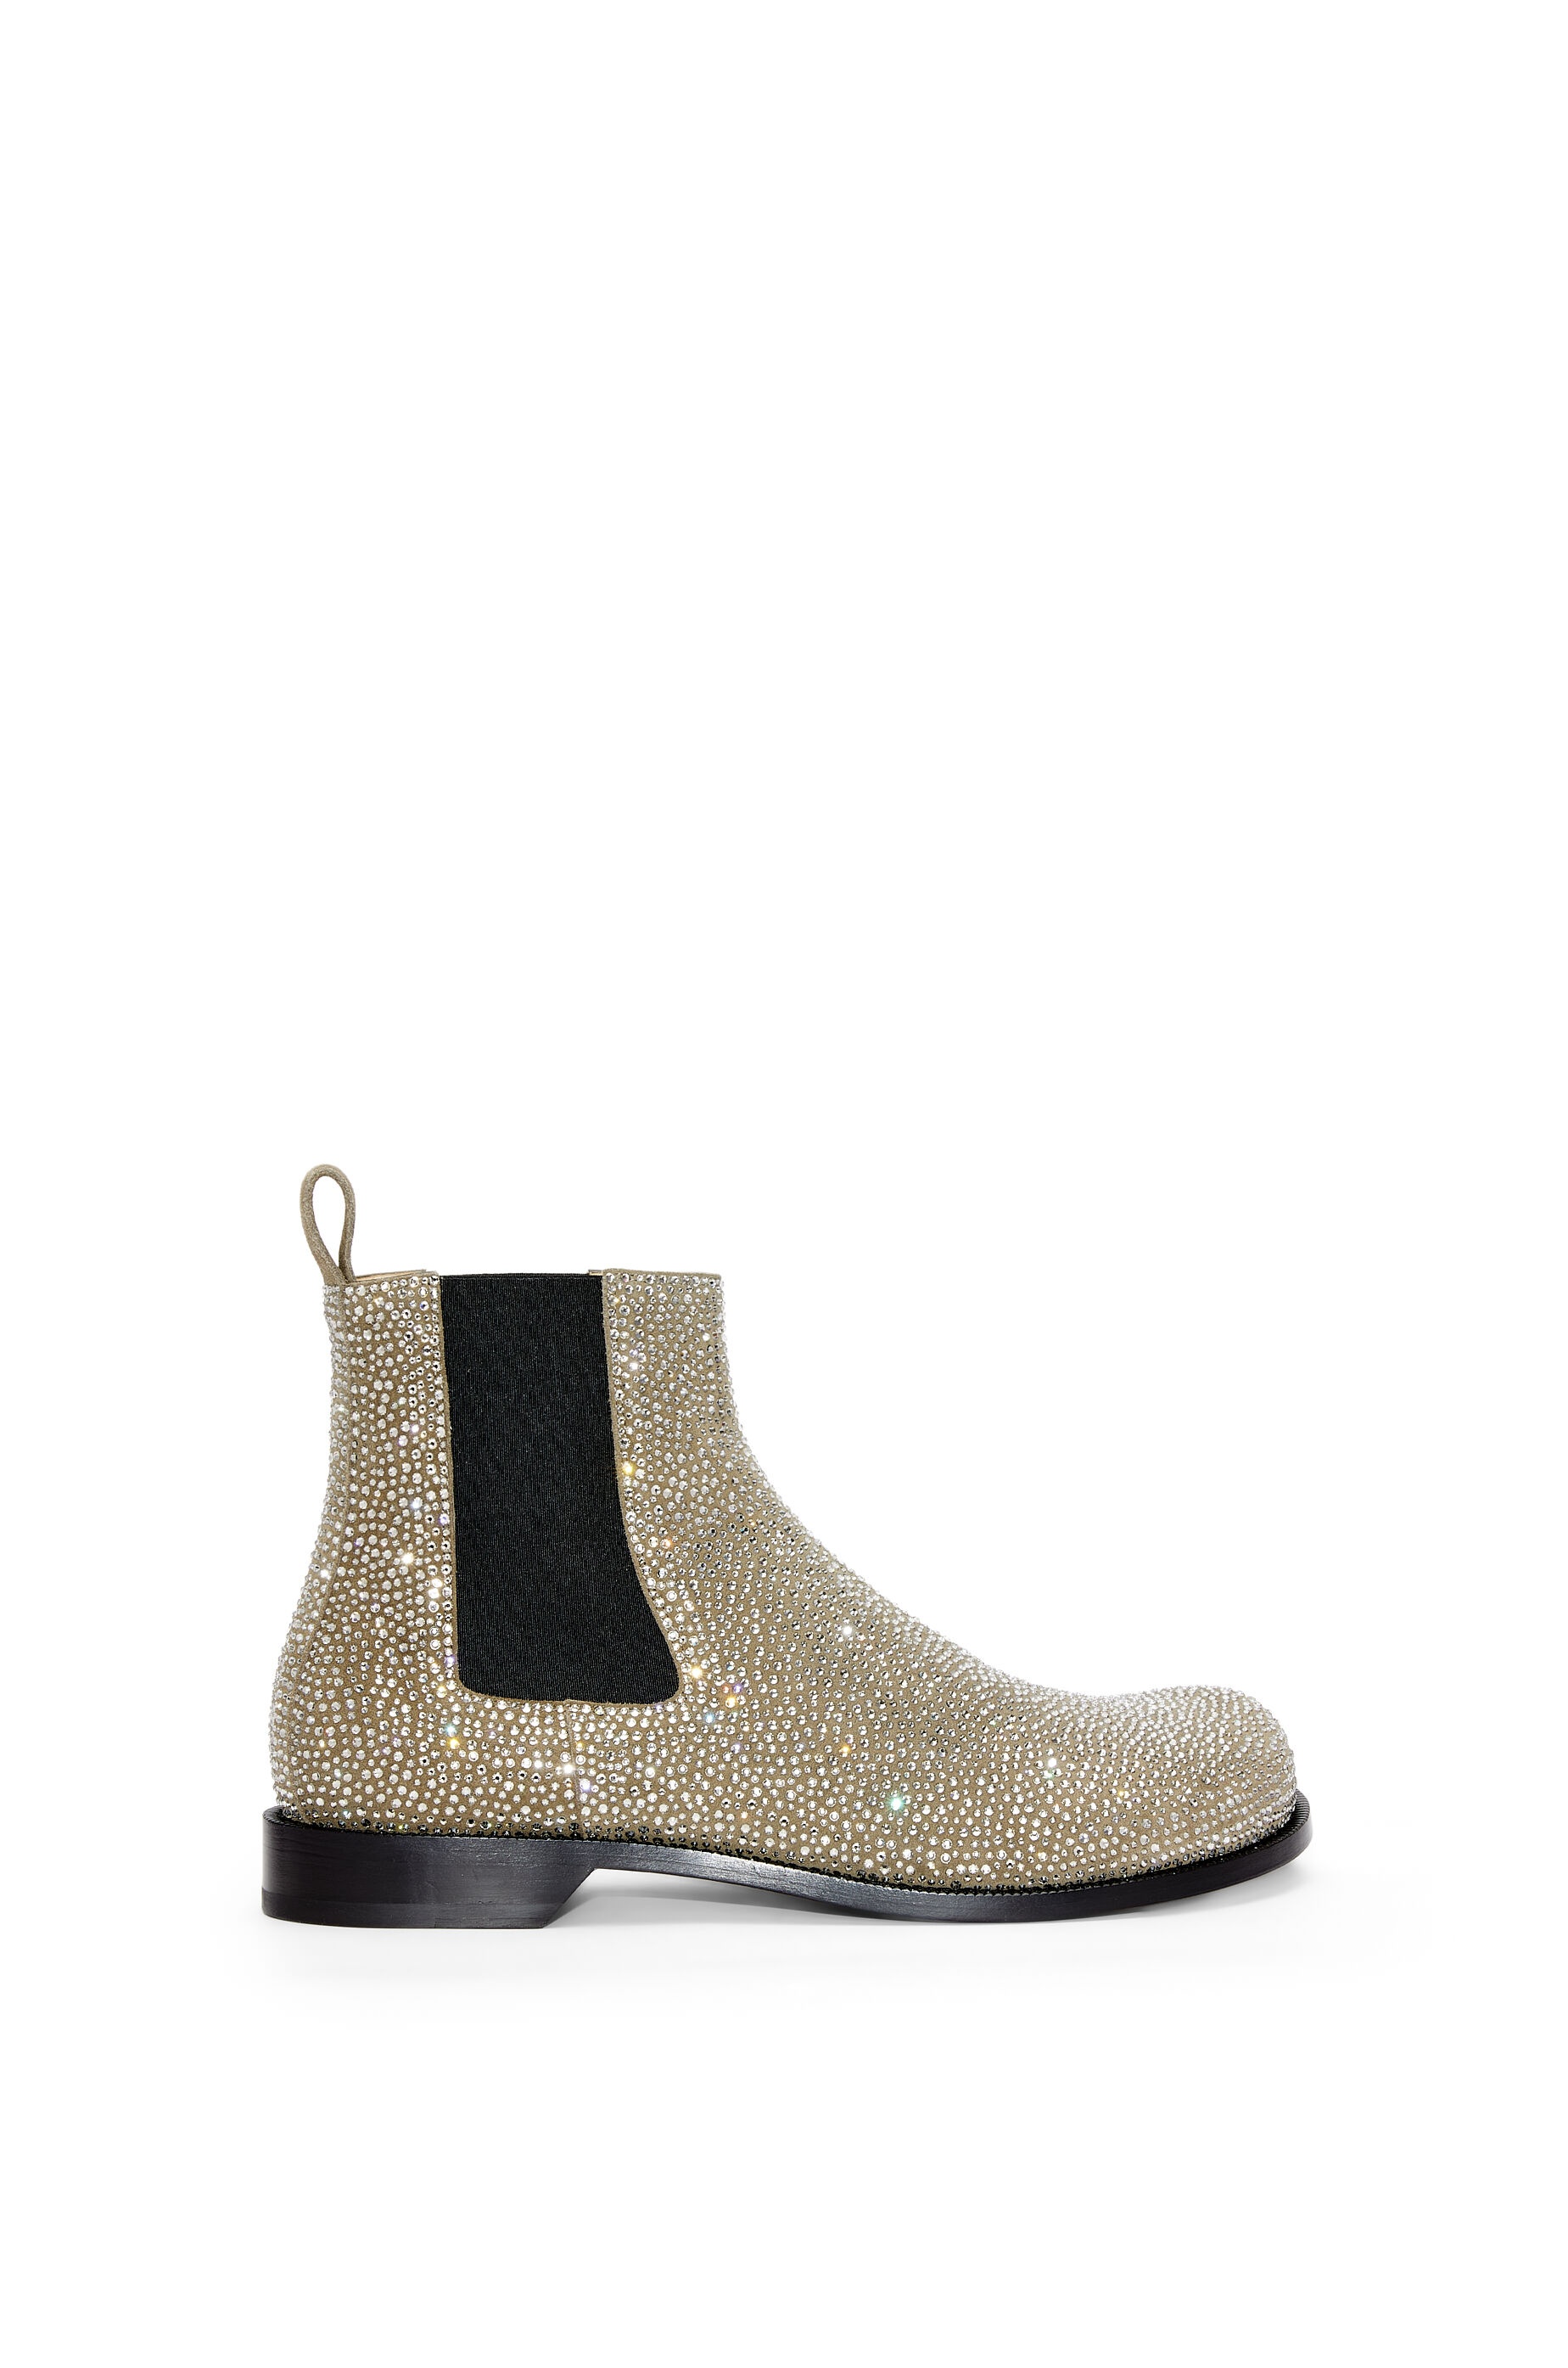 Campo Chelsea boot in suede calfskin and rhinestones - 1